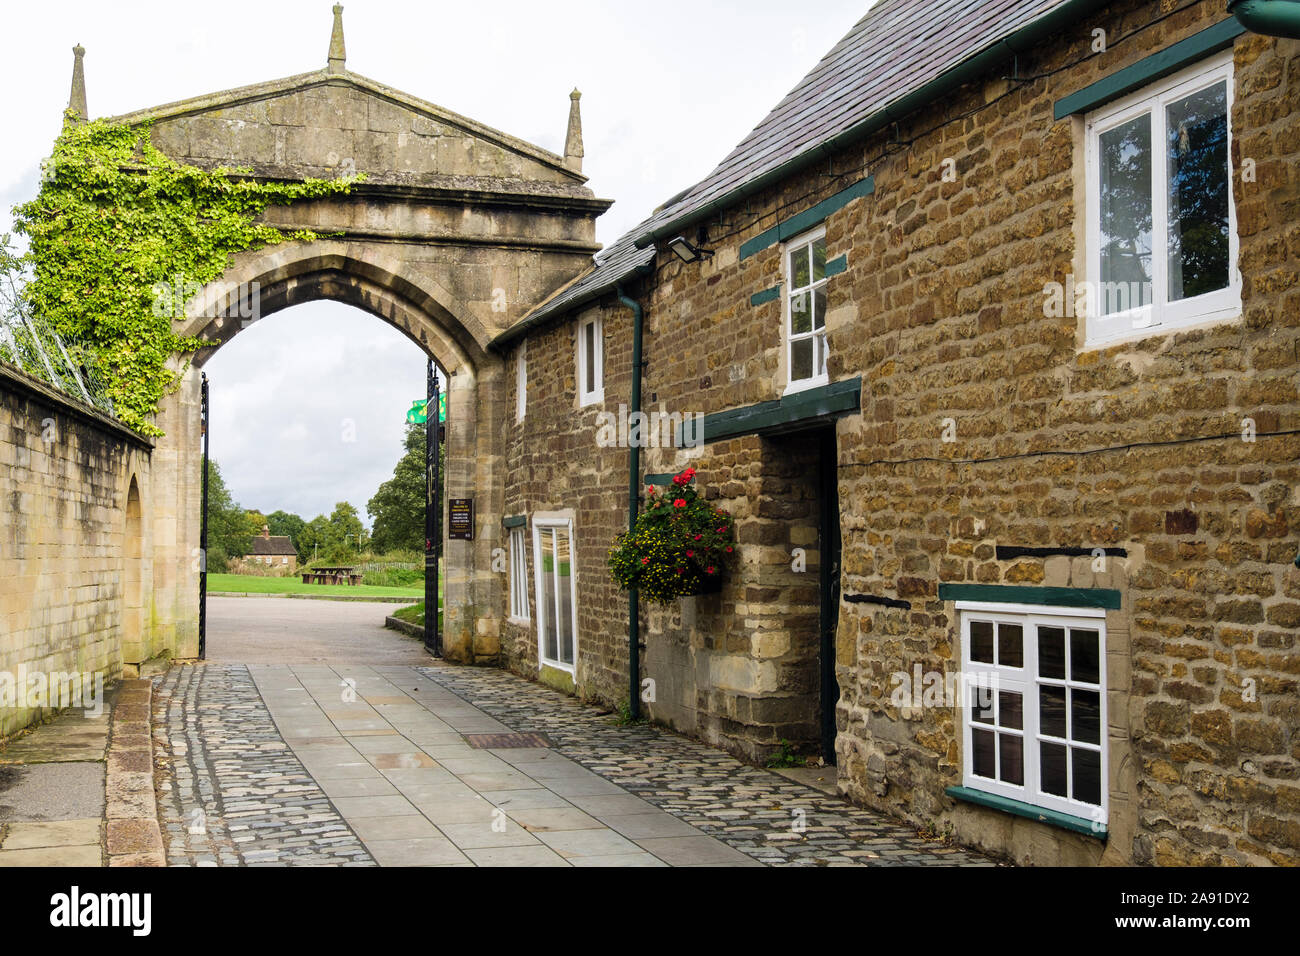 Old stone cottages on cobbled street leading to open arched gateway entrance to the castle. Oakham, Rutland, England, UK, Britain Stock Photo